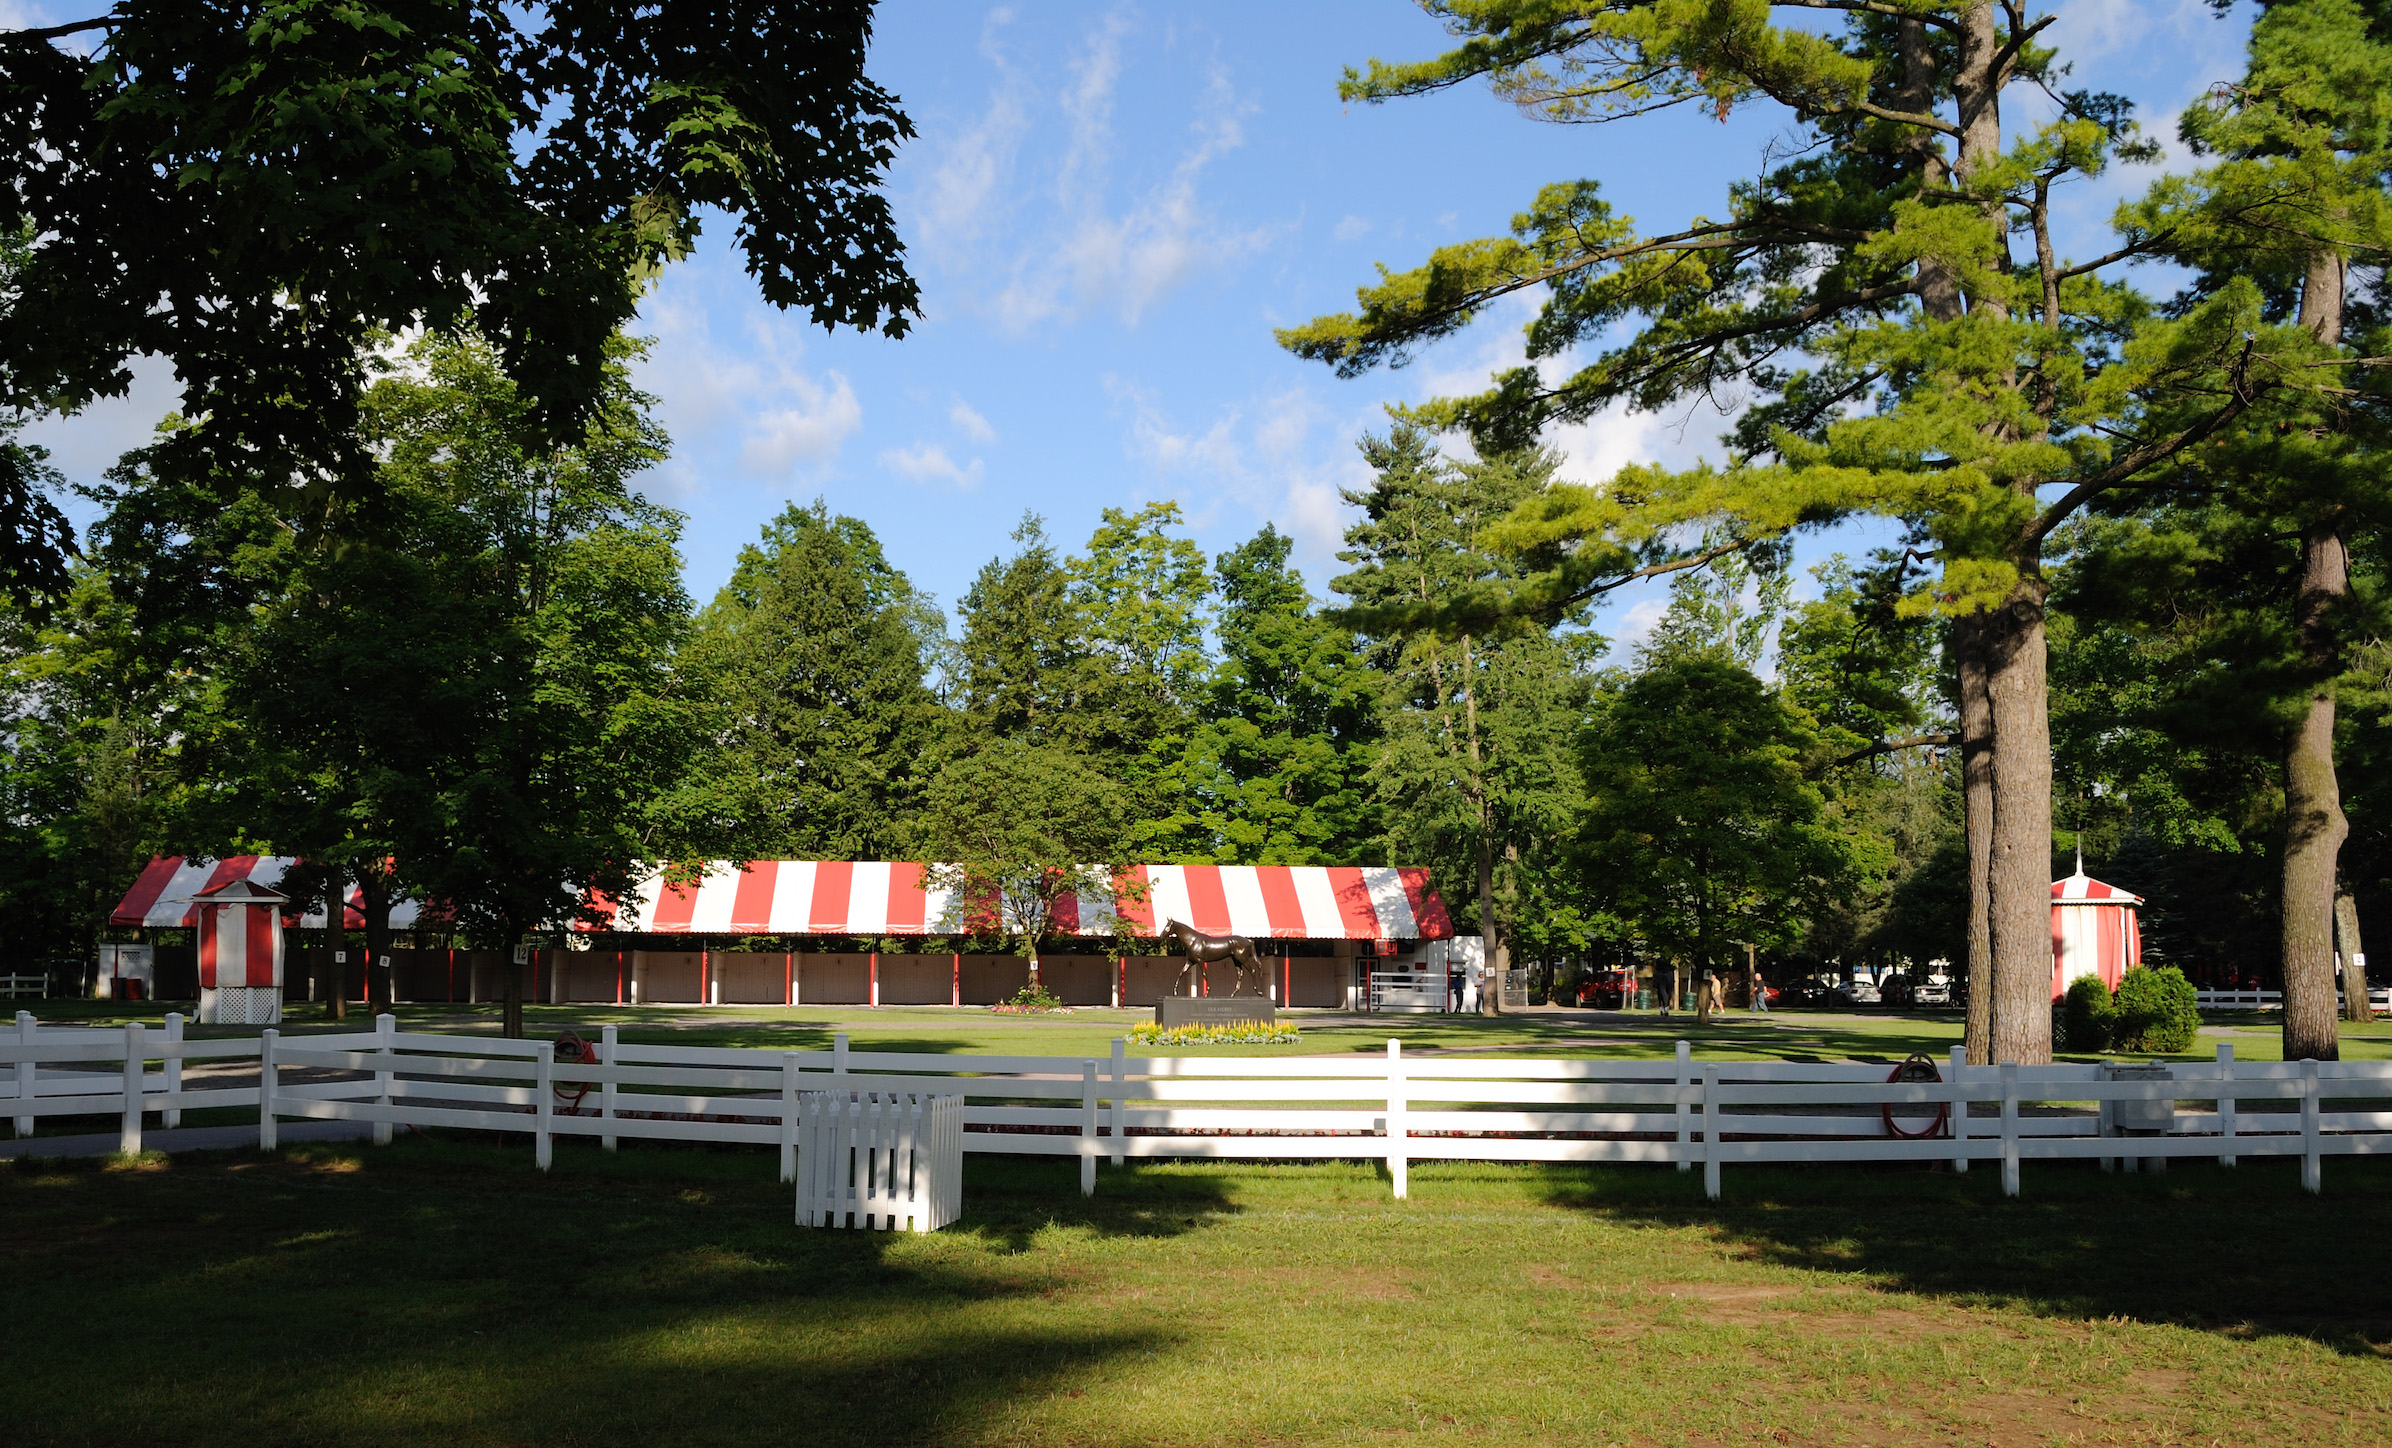 The red-and-white striped canopied saddling shed at Saratoga today. It was added in 1977. Image courtesy Turnberry Consulting